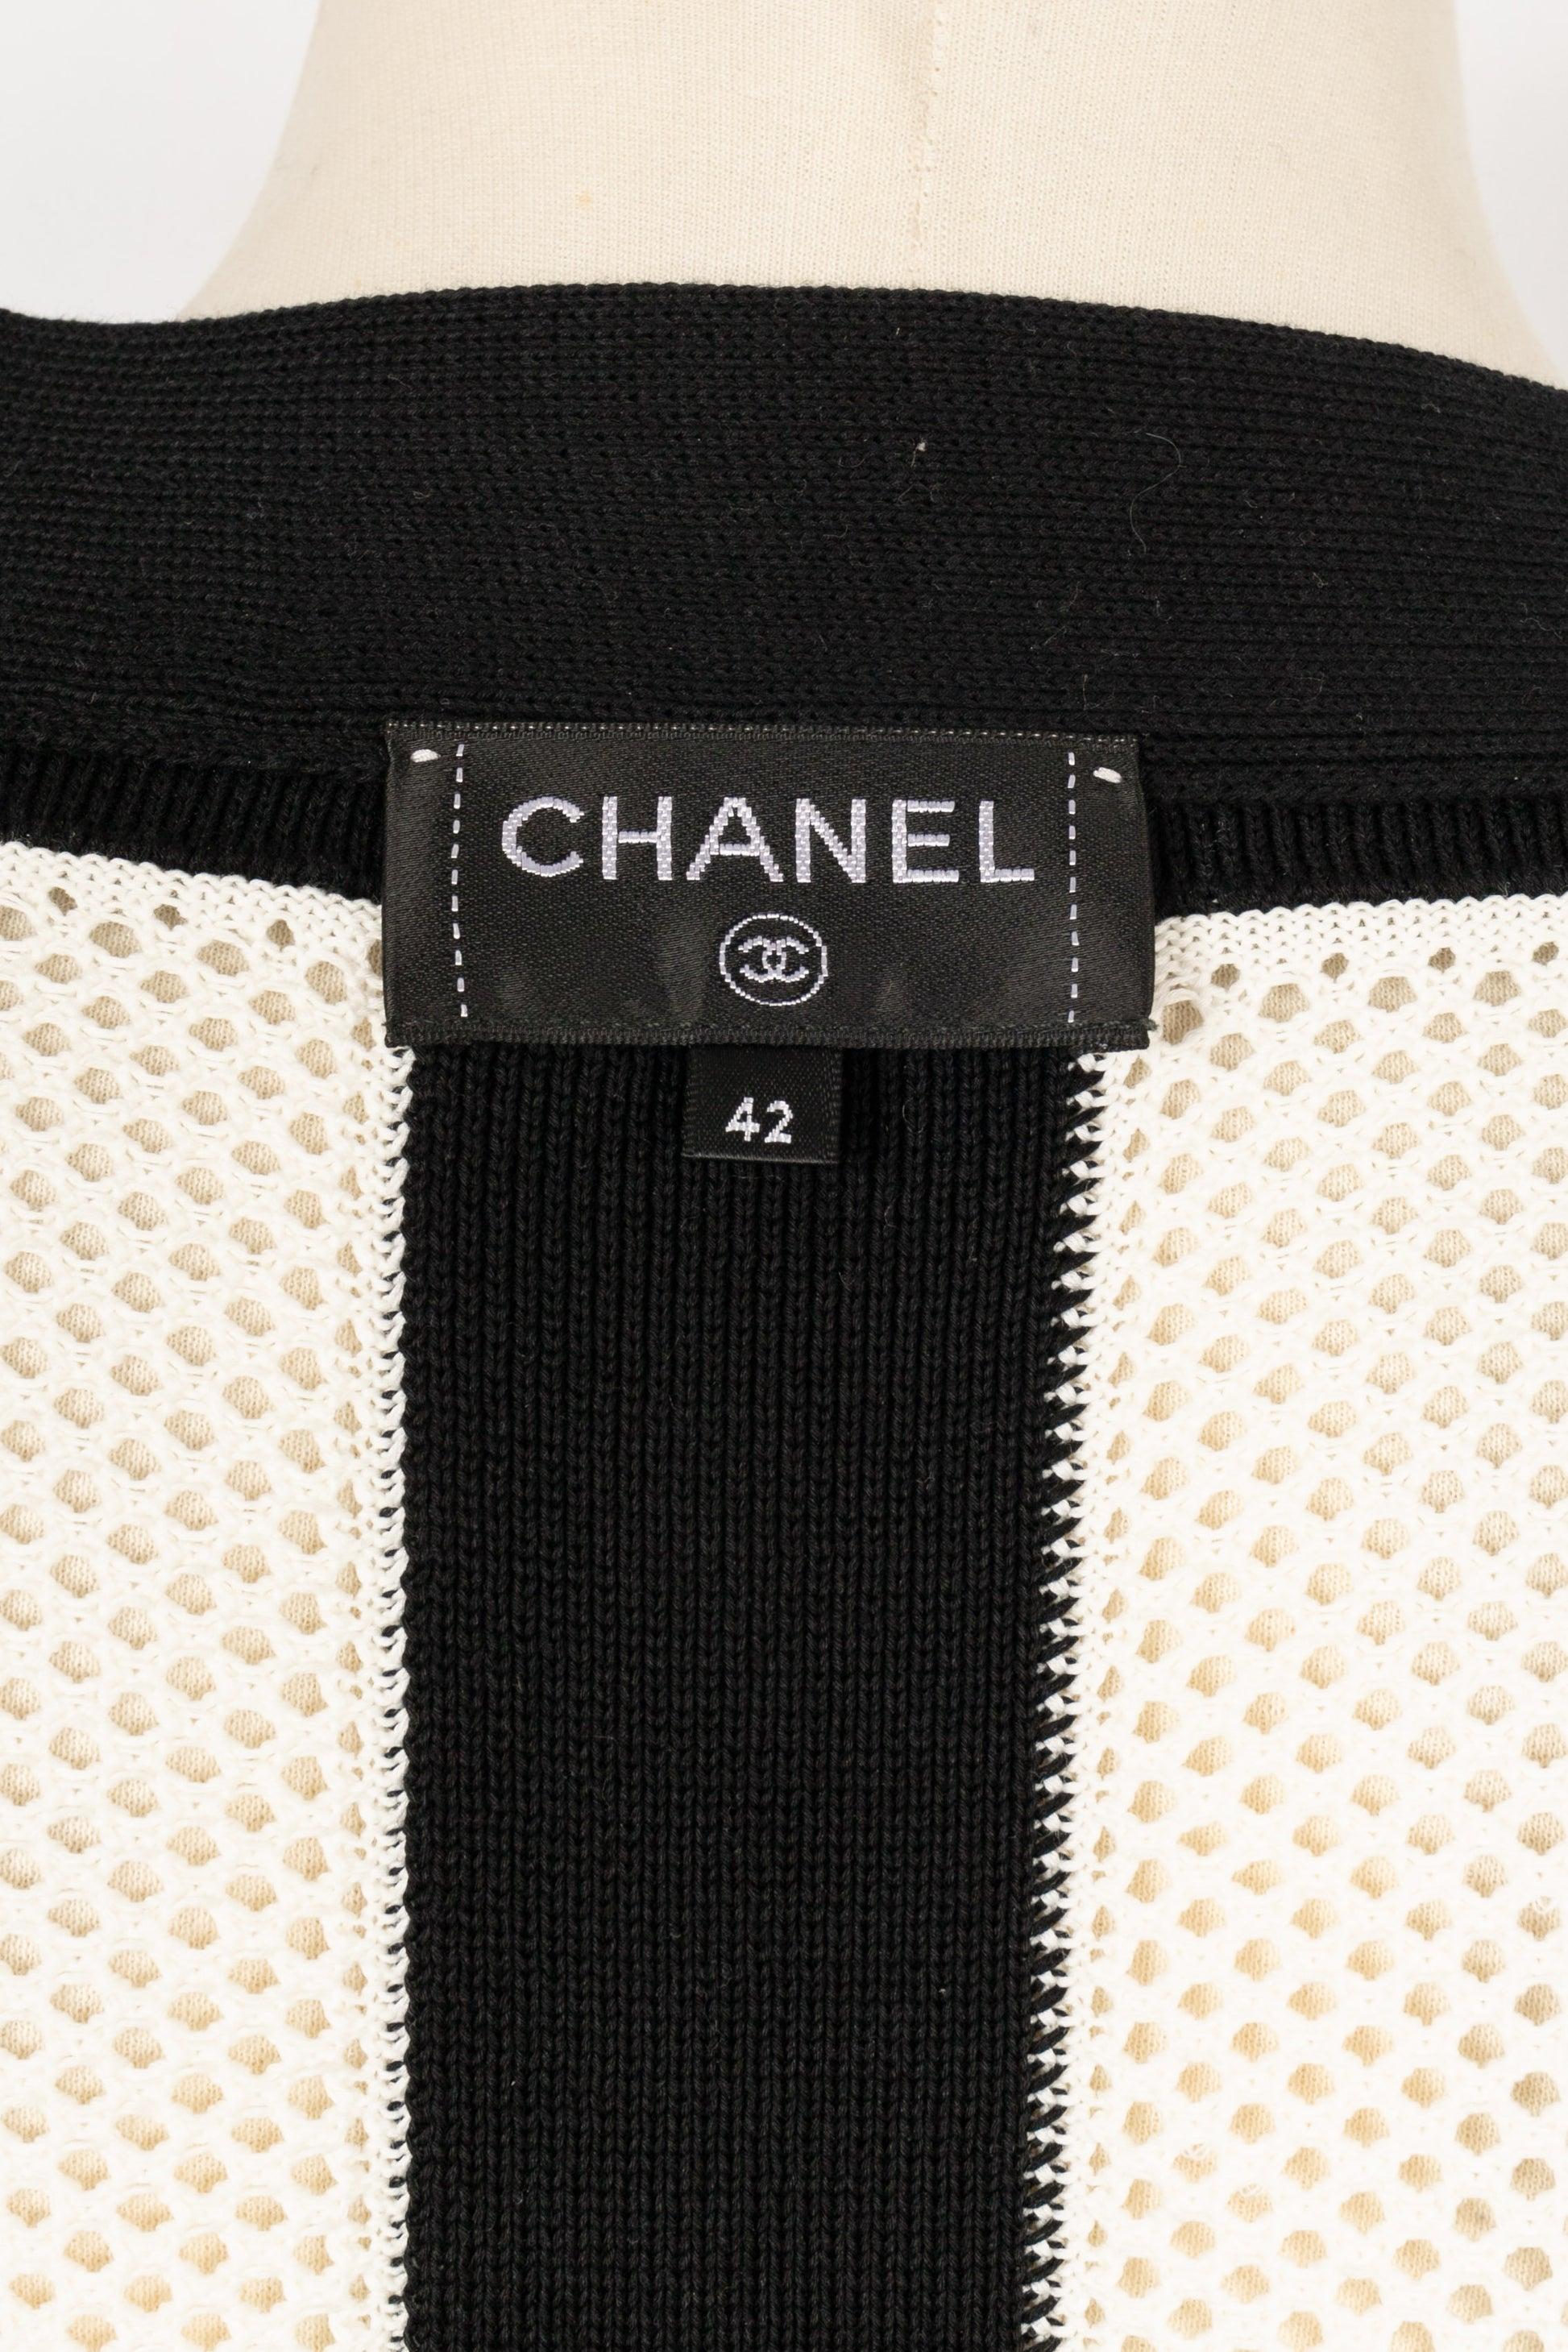 Chanel Jacket-Style Zipped Top in Black and White Mesh For Sale 3